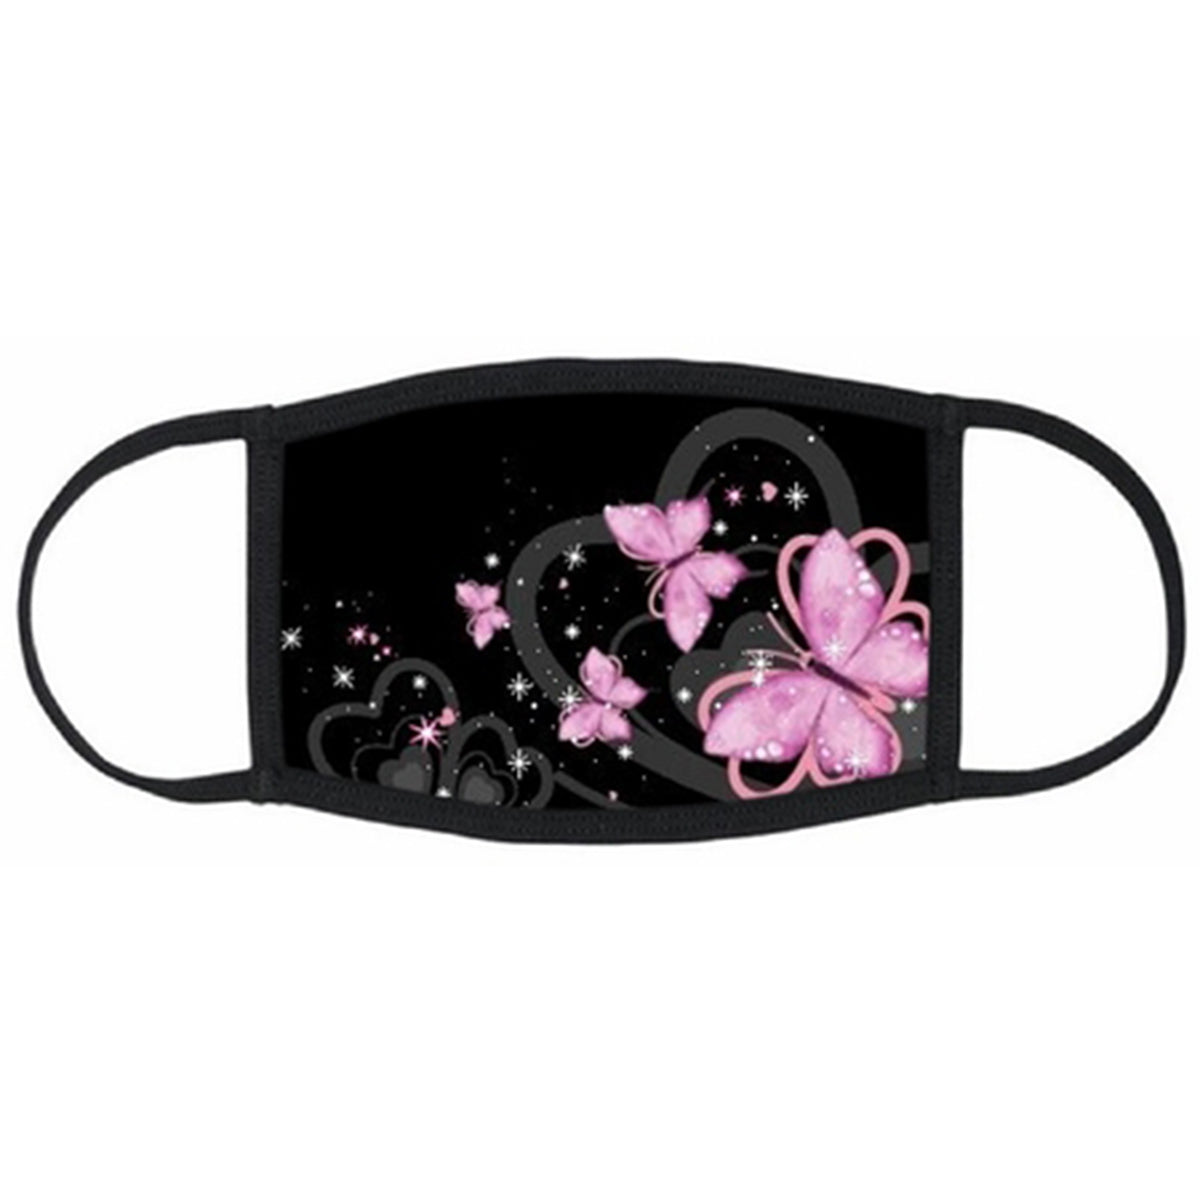 MSk-123 Pink Butterfly Washable Face Mask with inner pocket for filter